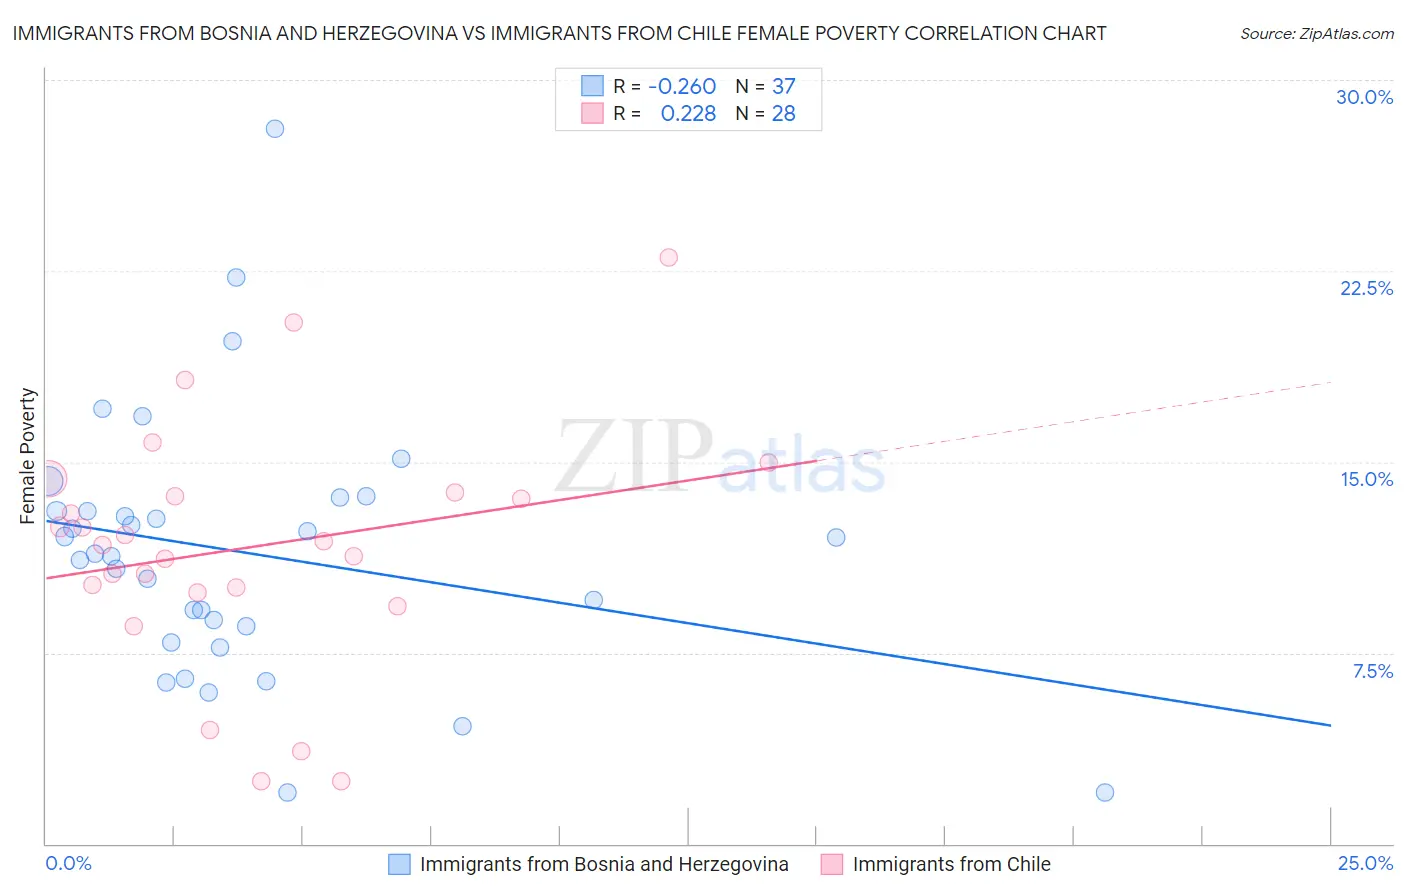 Immigrants from Bosnia and Herzegovina vs Immigrants from Chile Female Poverty